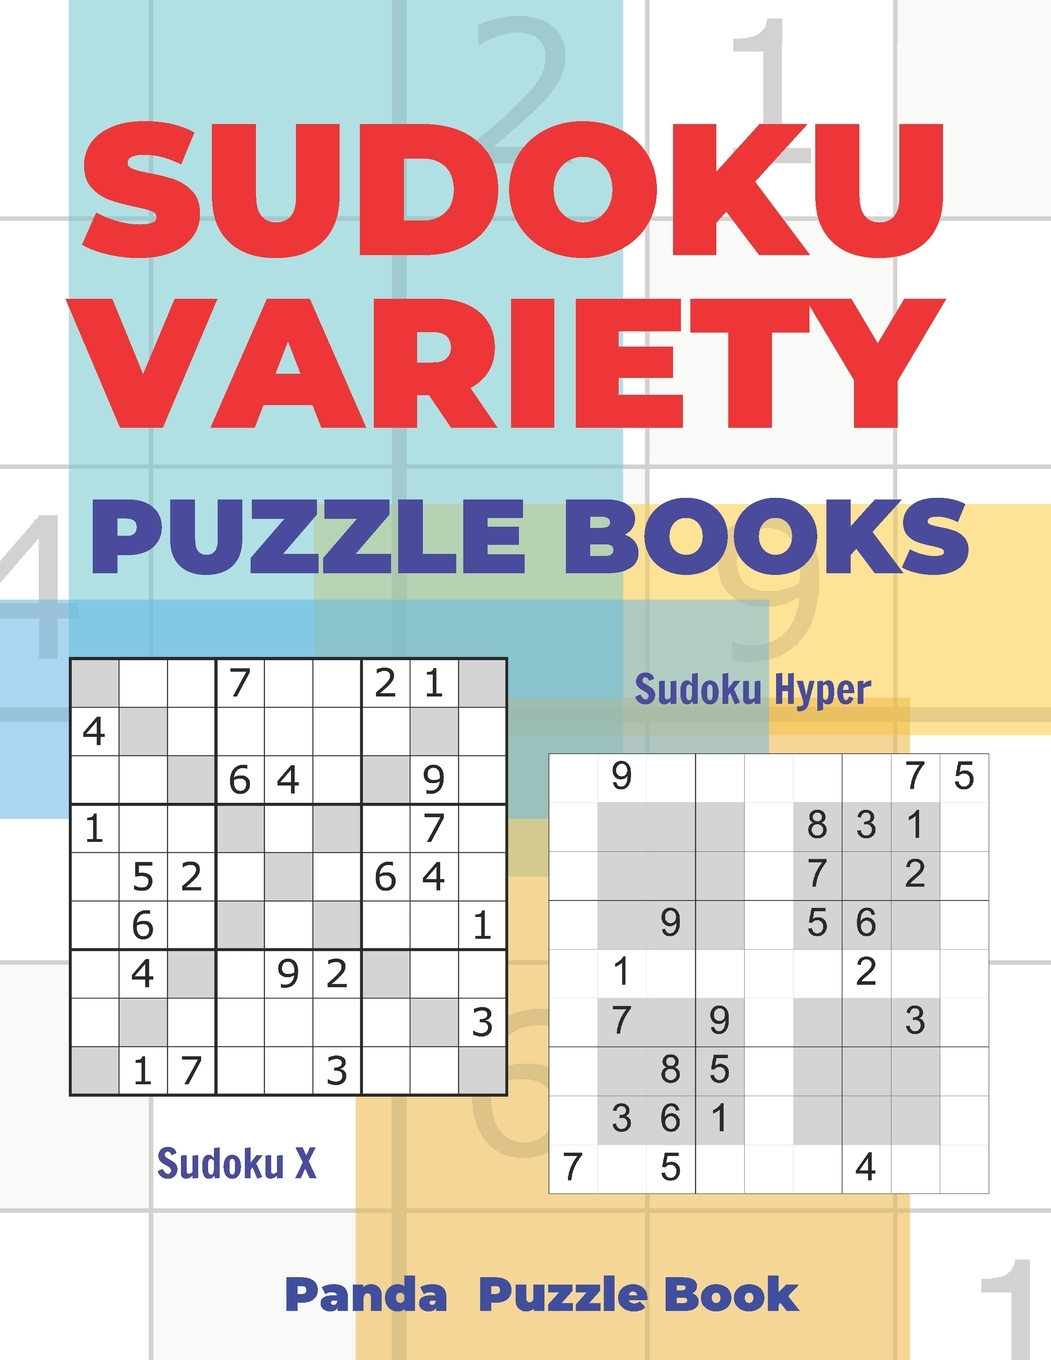 Sudoku Variety Puzzle Books Sudoku Variations Puzzle Books Featuring 